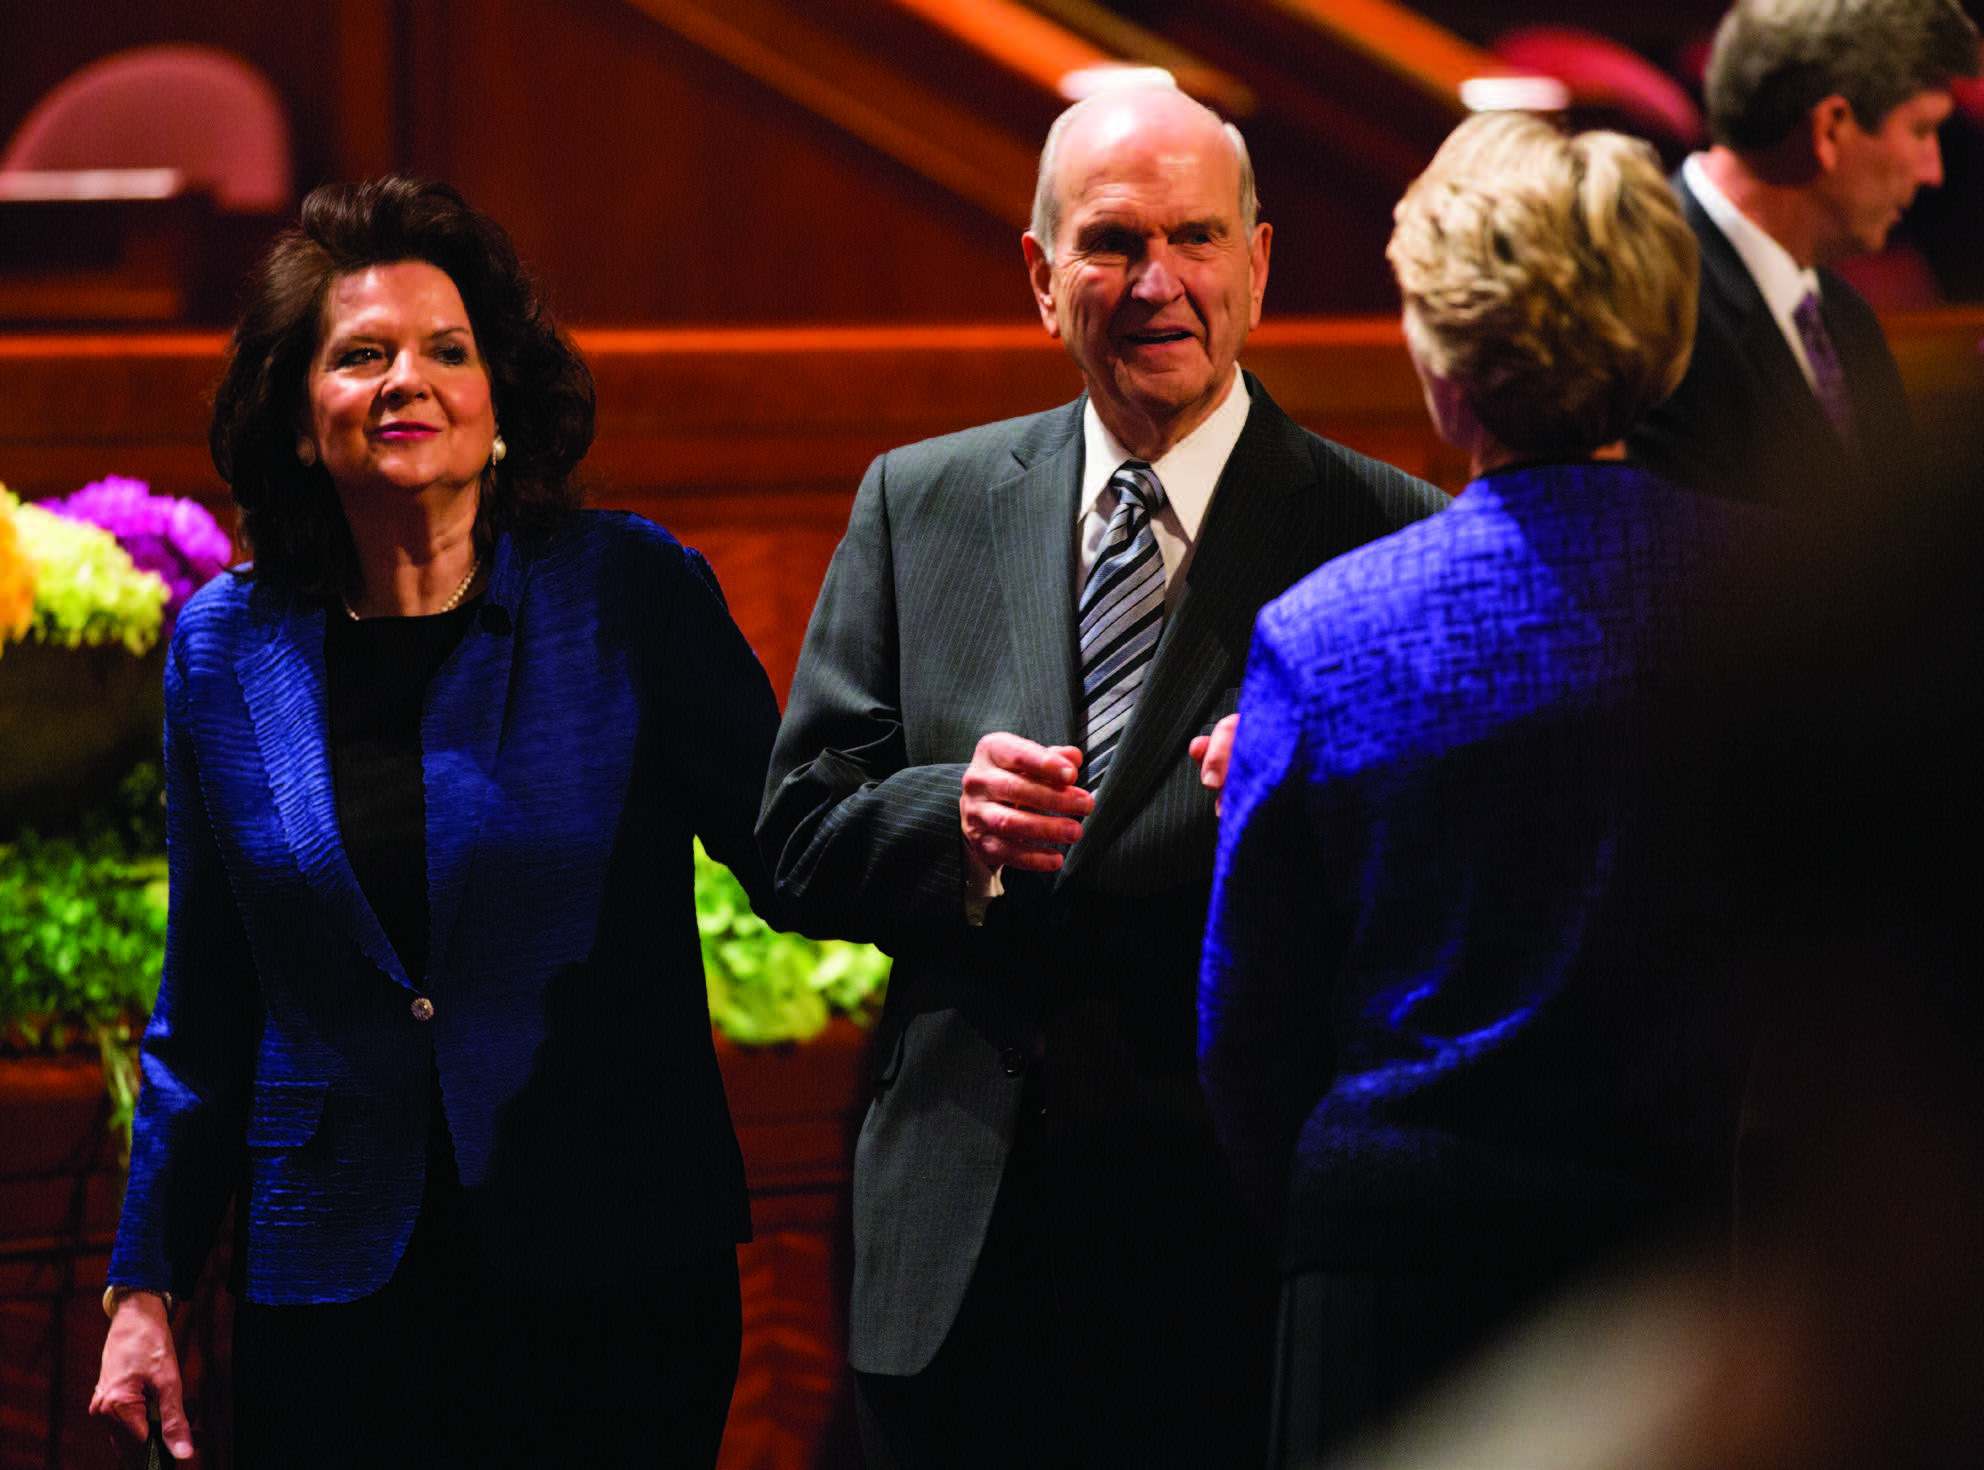 presdient nelson and wife